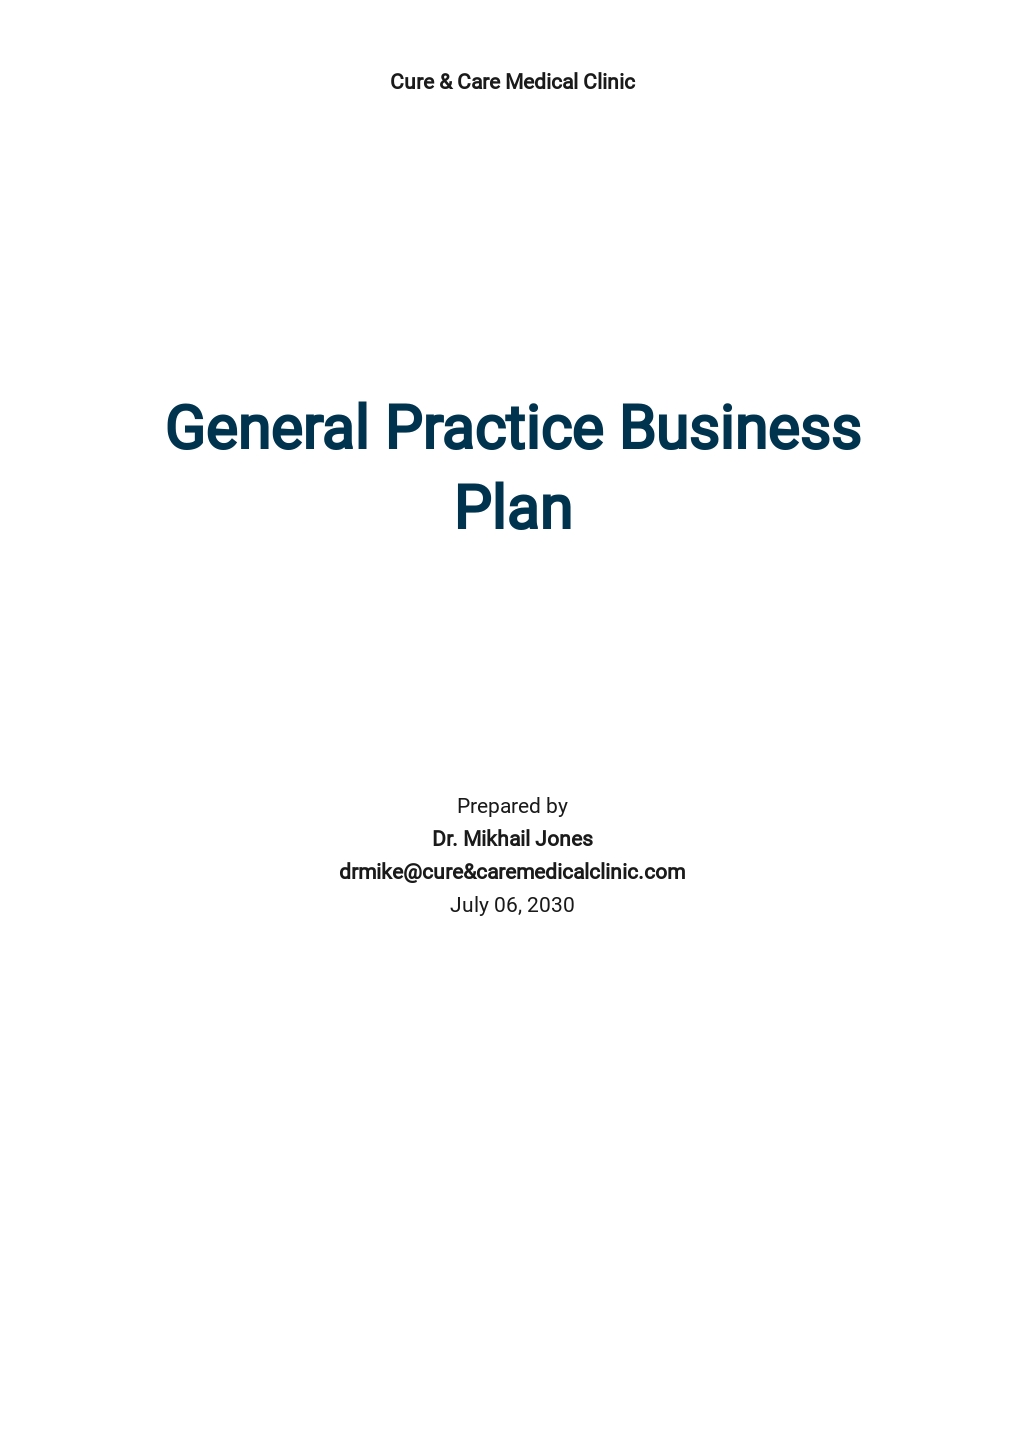 a business plan in general